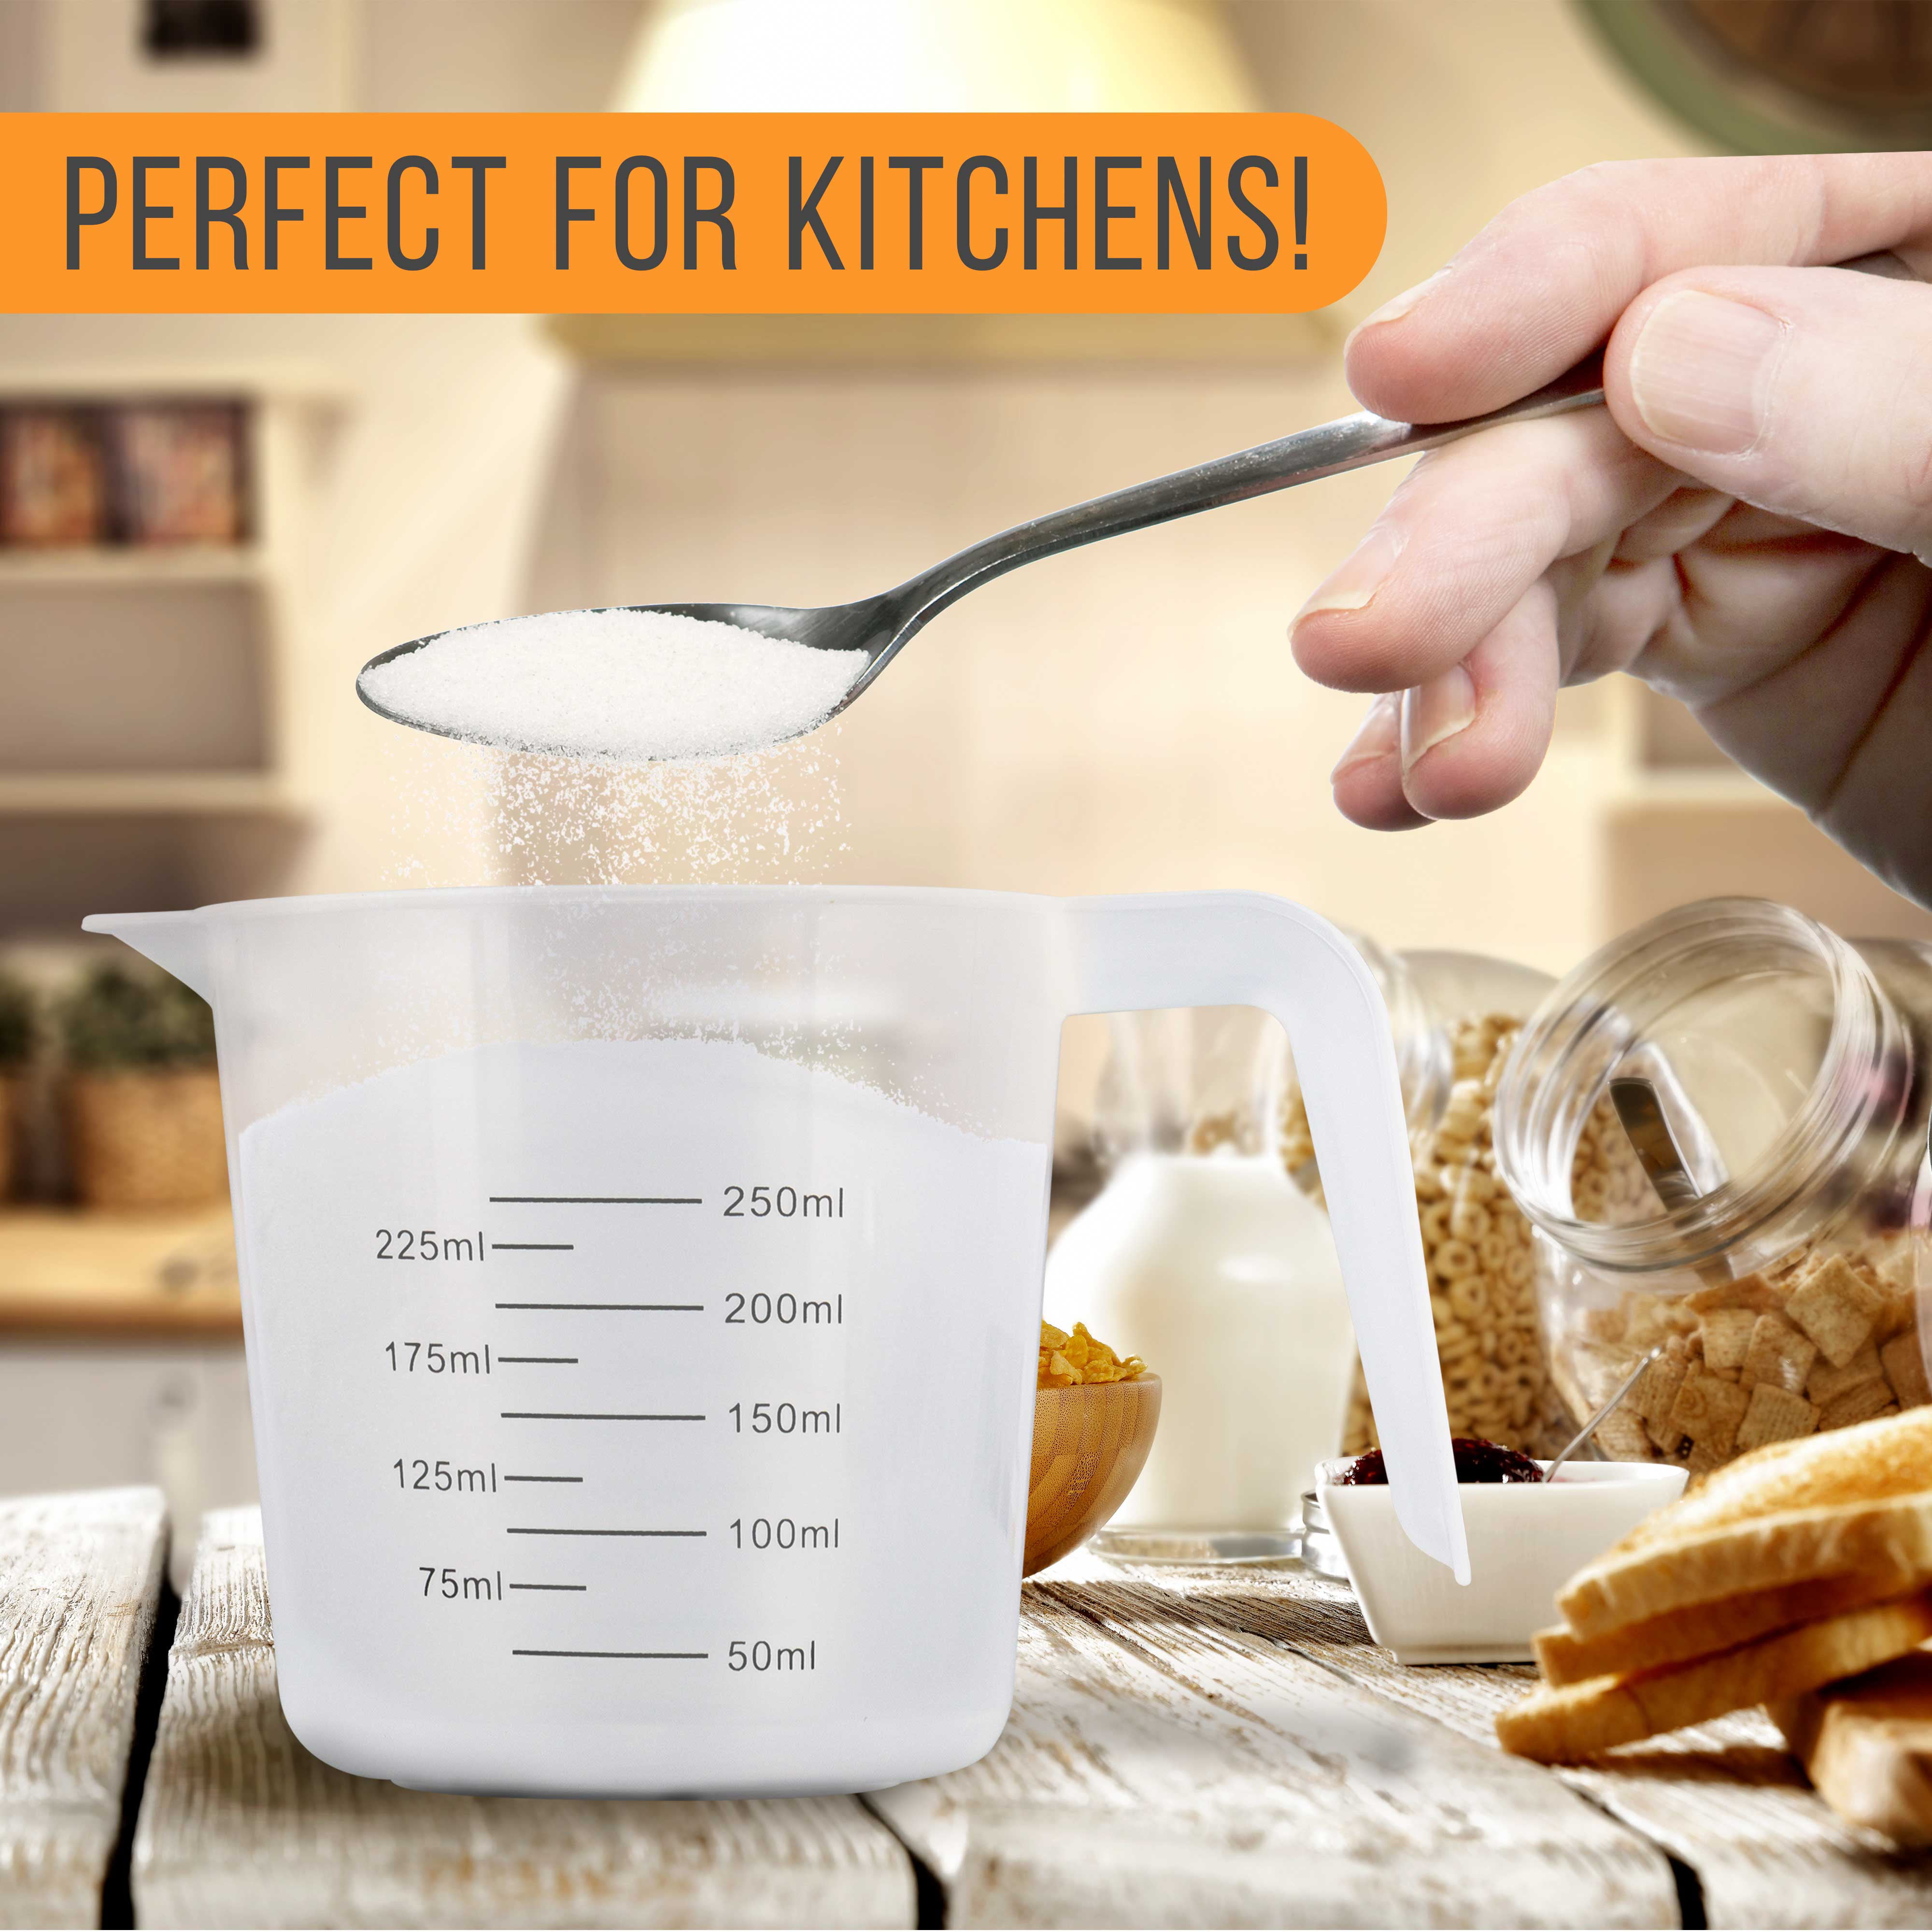  Amazing Abby - Melissa - Unbreakable Plastic Measuring Cups  (3-Piece Set), Food-Grade Measuring Jugs, 1/2/4-Cup Capacity, Stackable and  Dishwasher-Safe, Great for Oil, Vinegar, Flour, More: Home & Kitchen